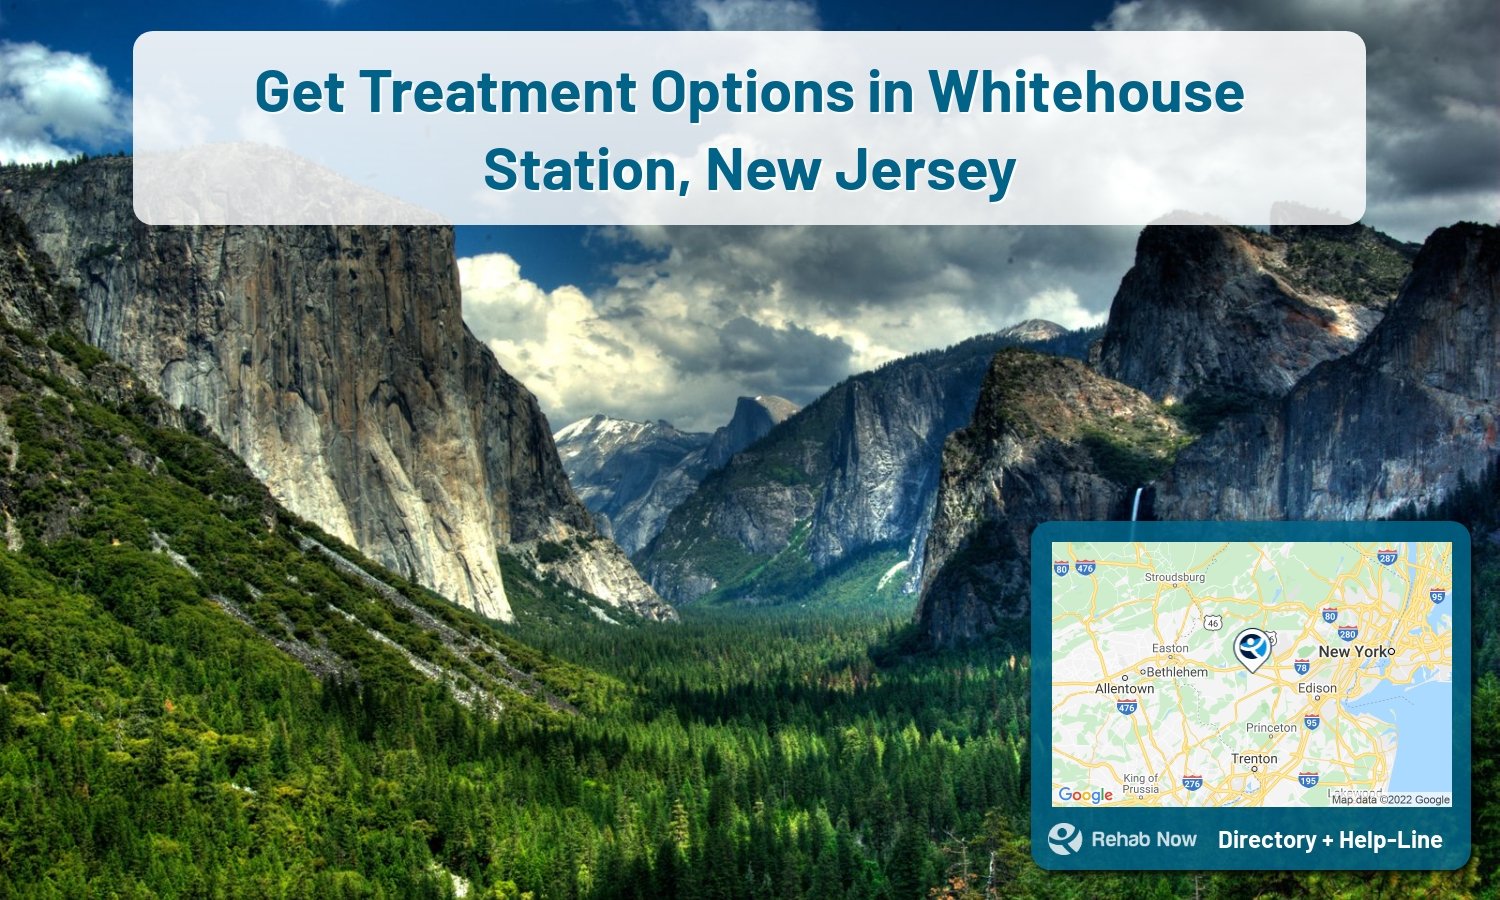 Our experts can help you find treatment now in Whitehouse Station, New Jersey. We list drug rehab and alcohol centers in New Jersey.